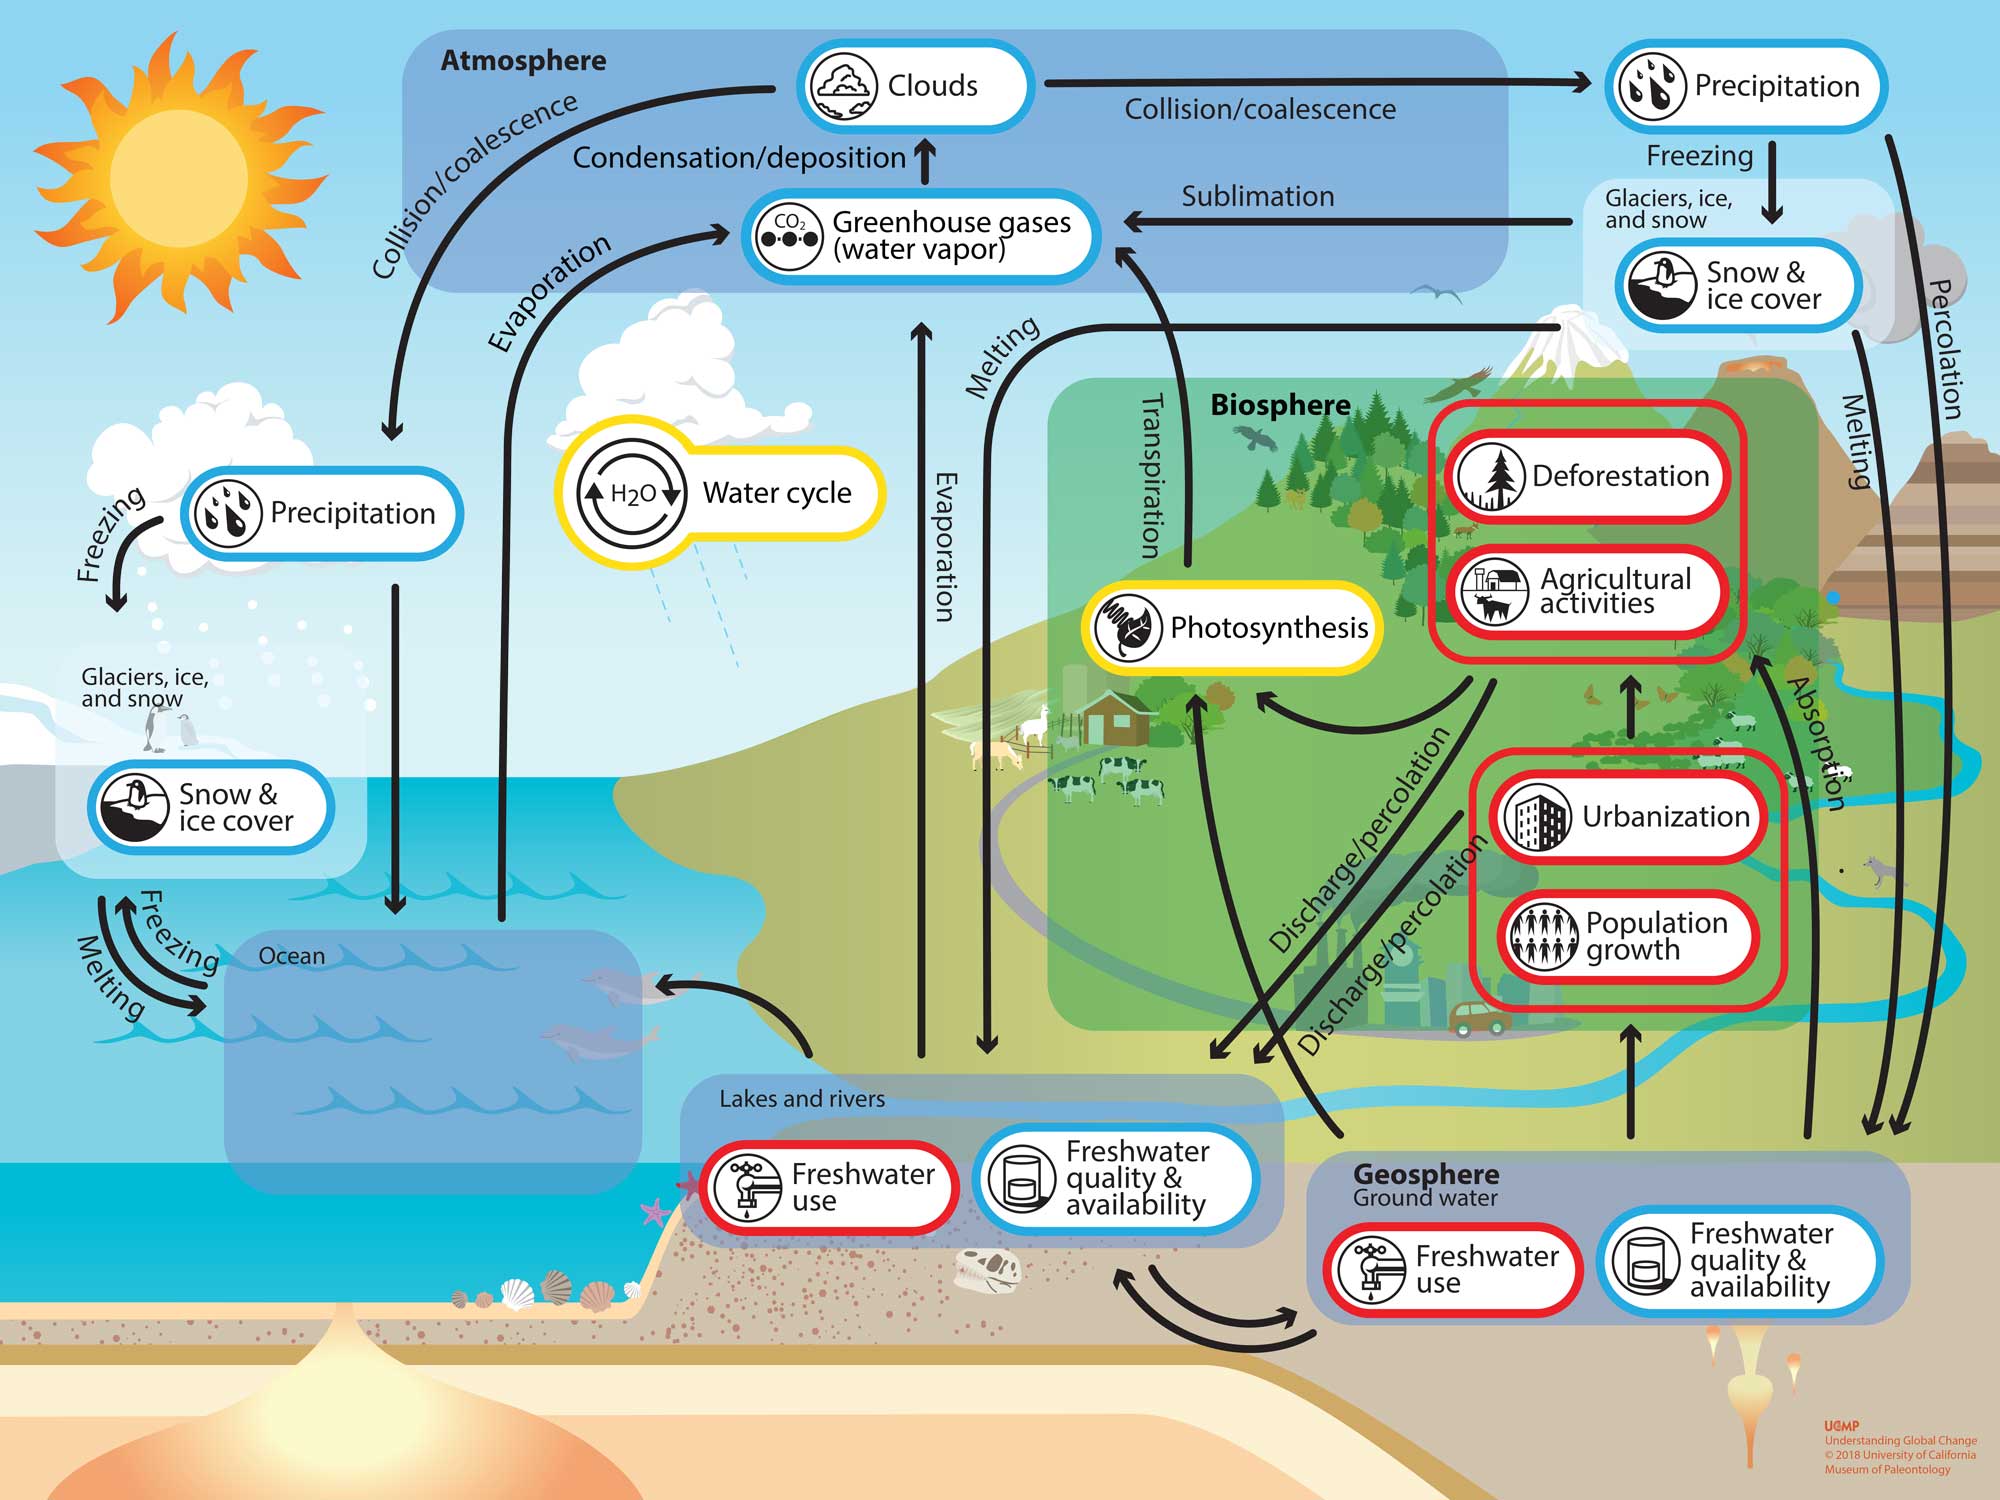 WCOM: The science scenario and objectives of a global water cycle